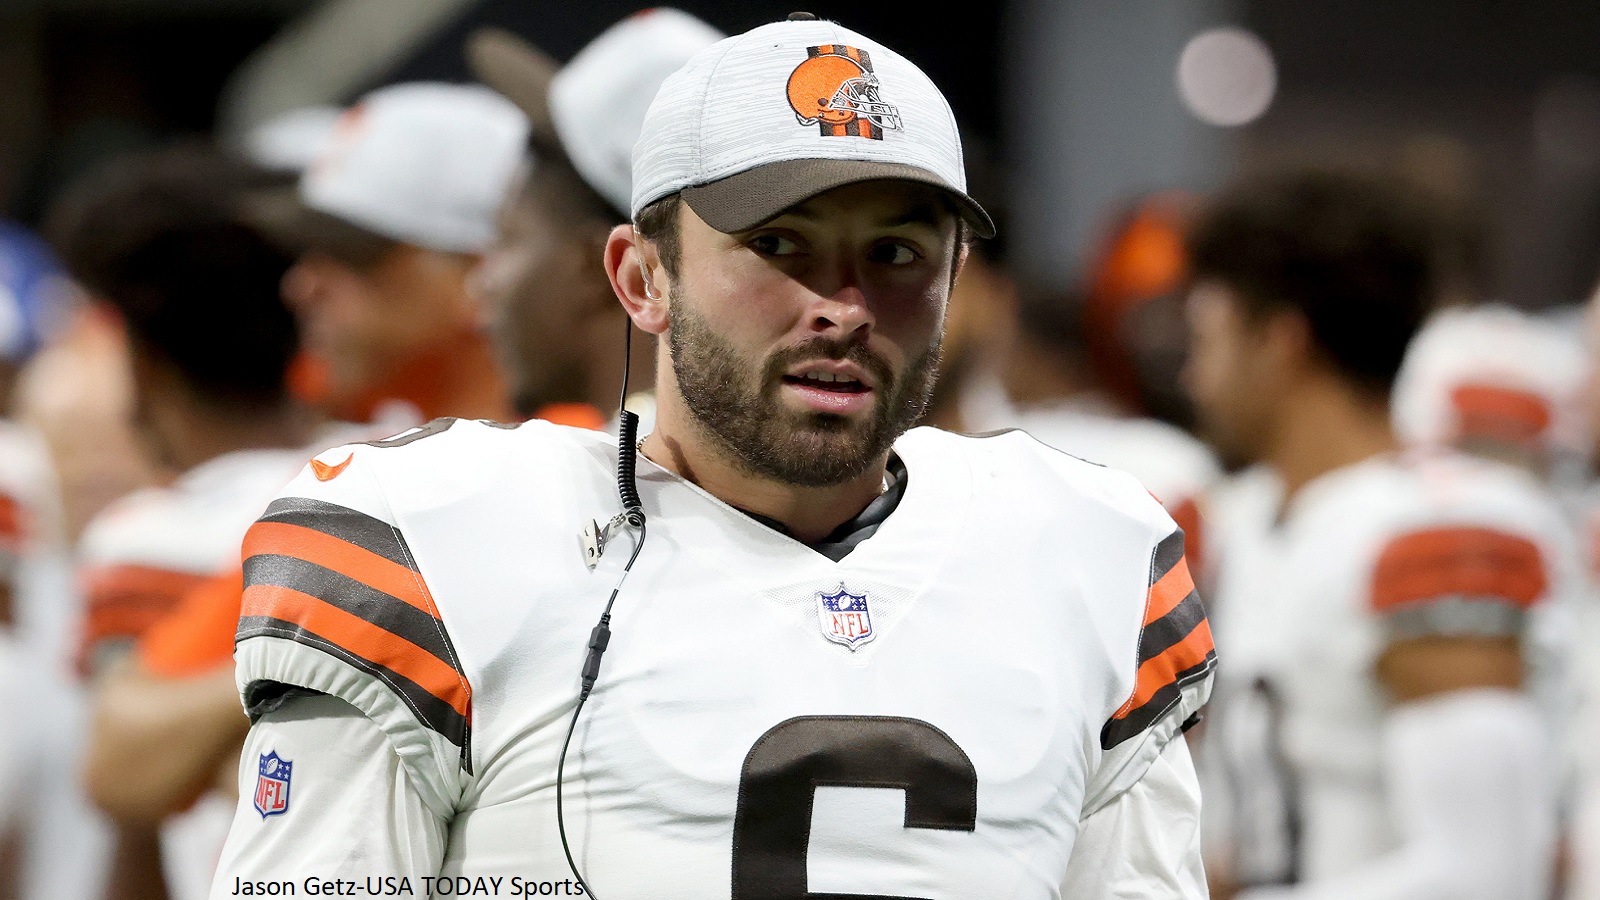 Report: 1 NFC team will not trade for Baker Mayfield before draft